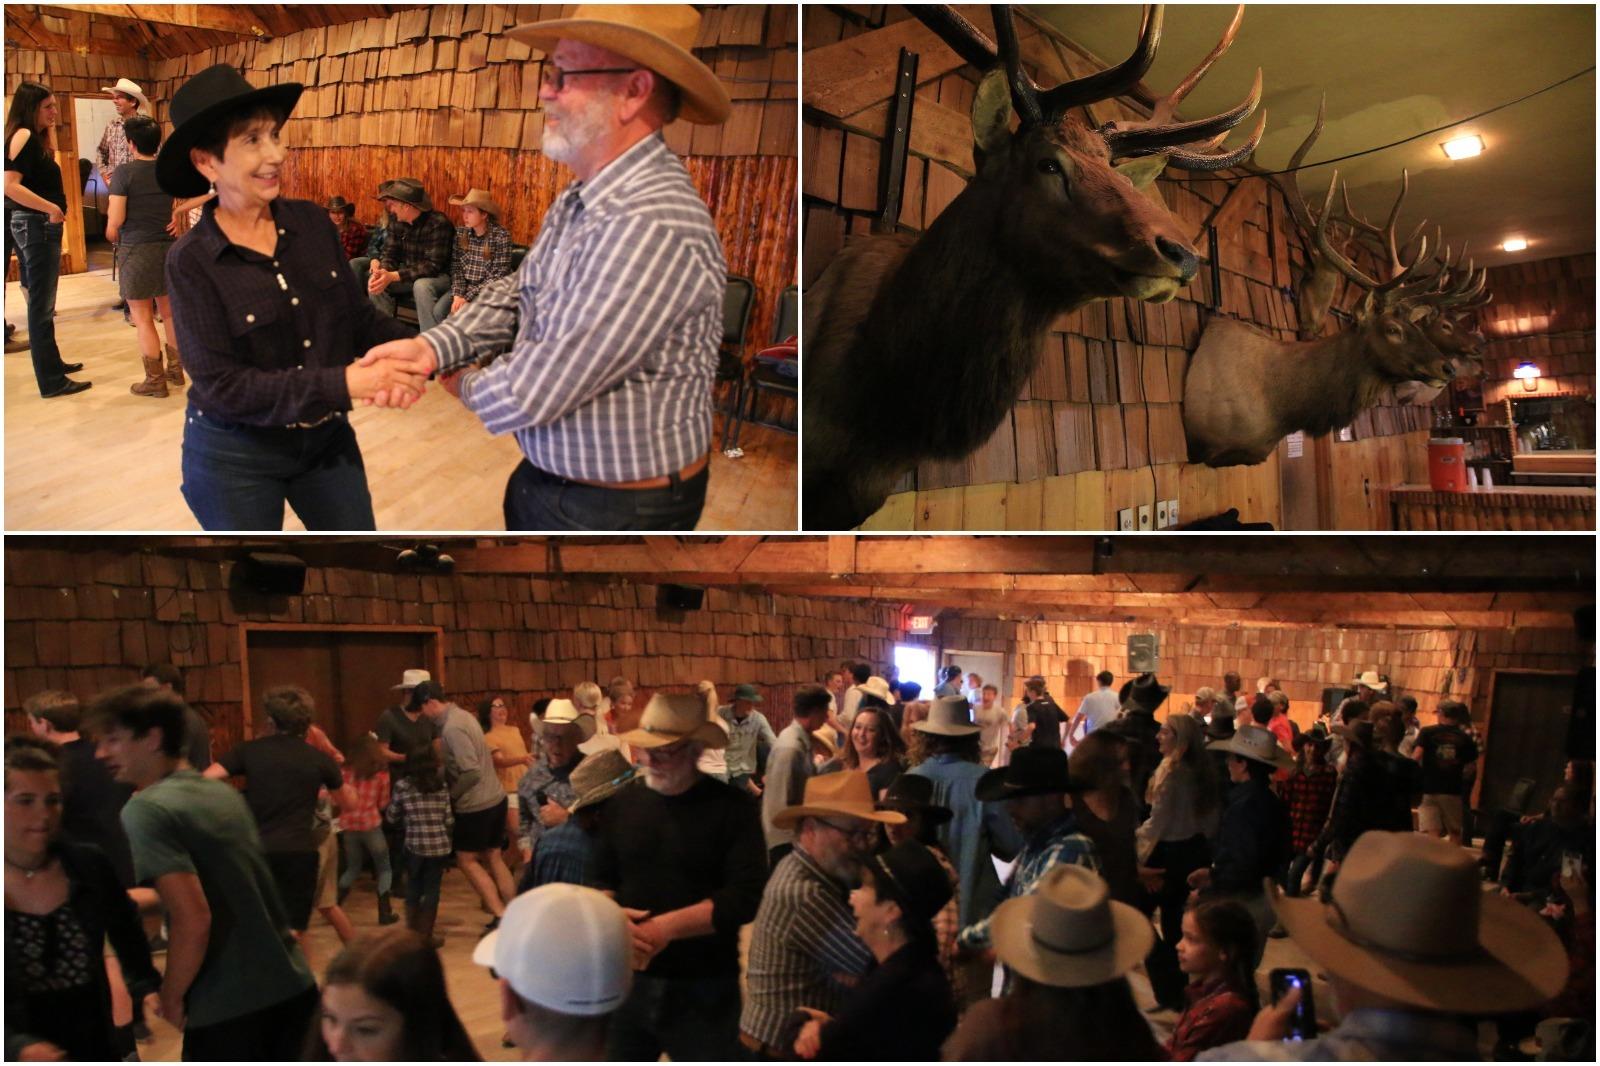 Square dancing in Dubois, one of the many things to do in Wyoming.